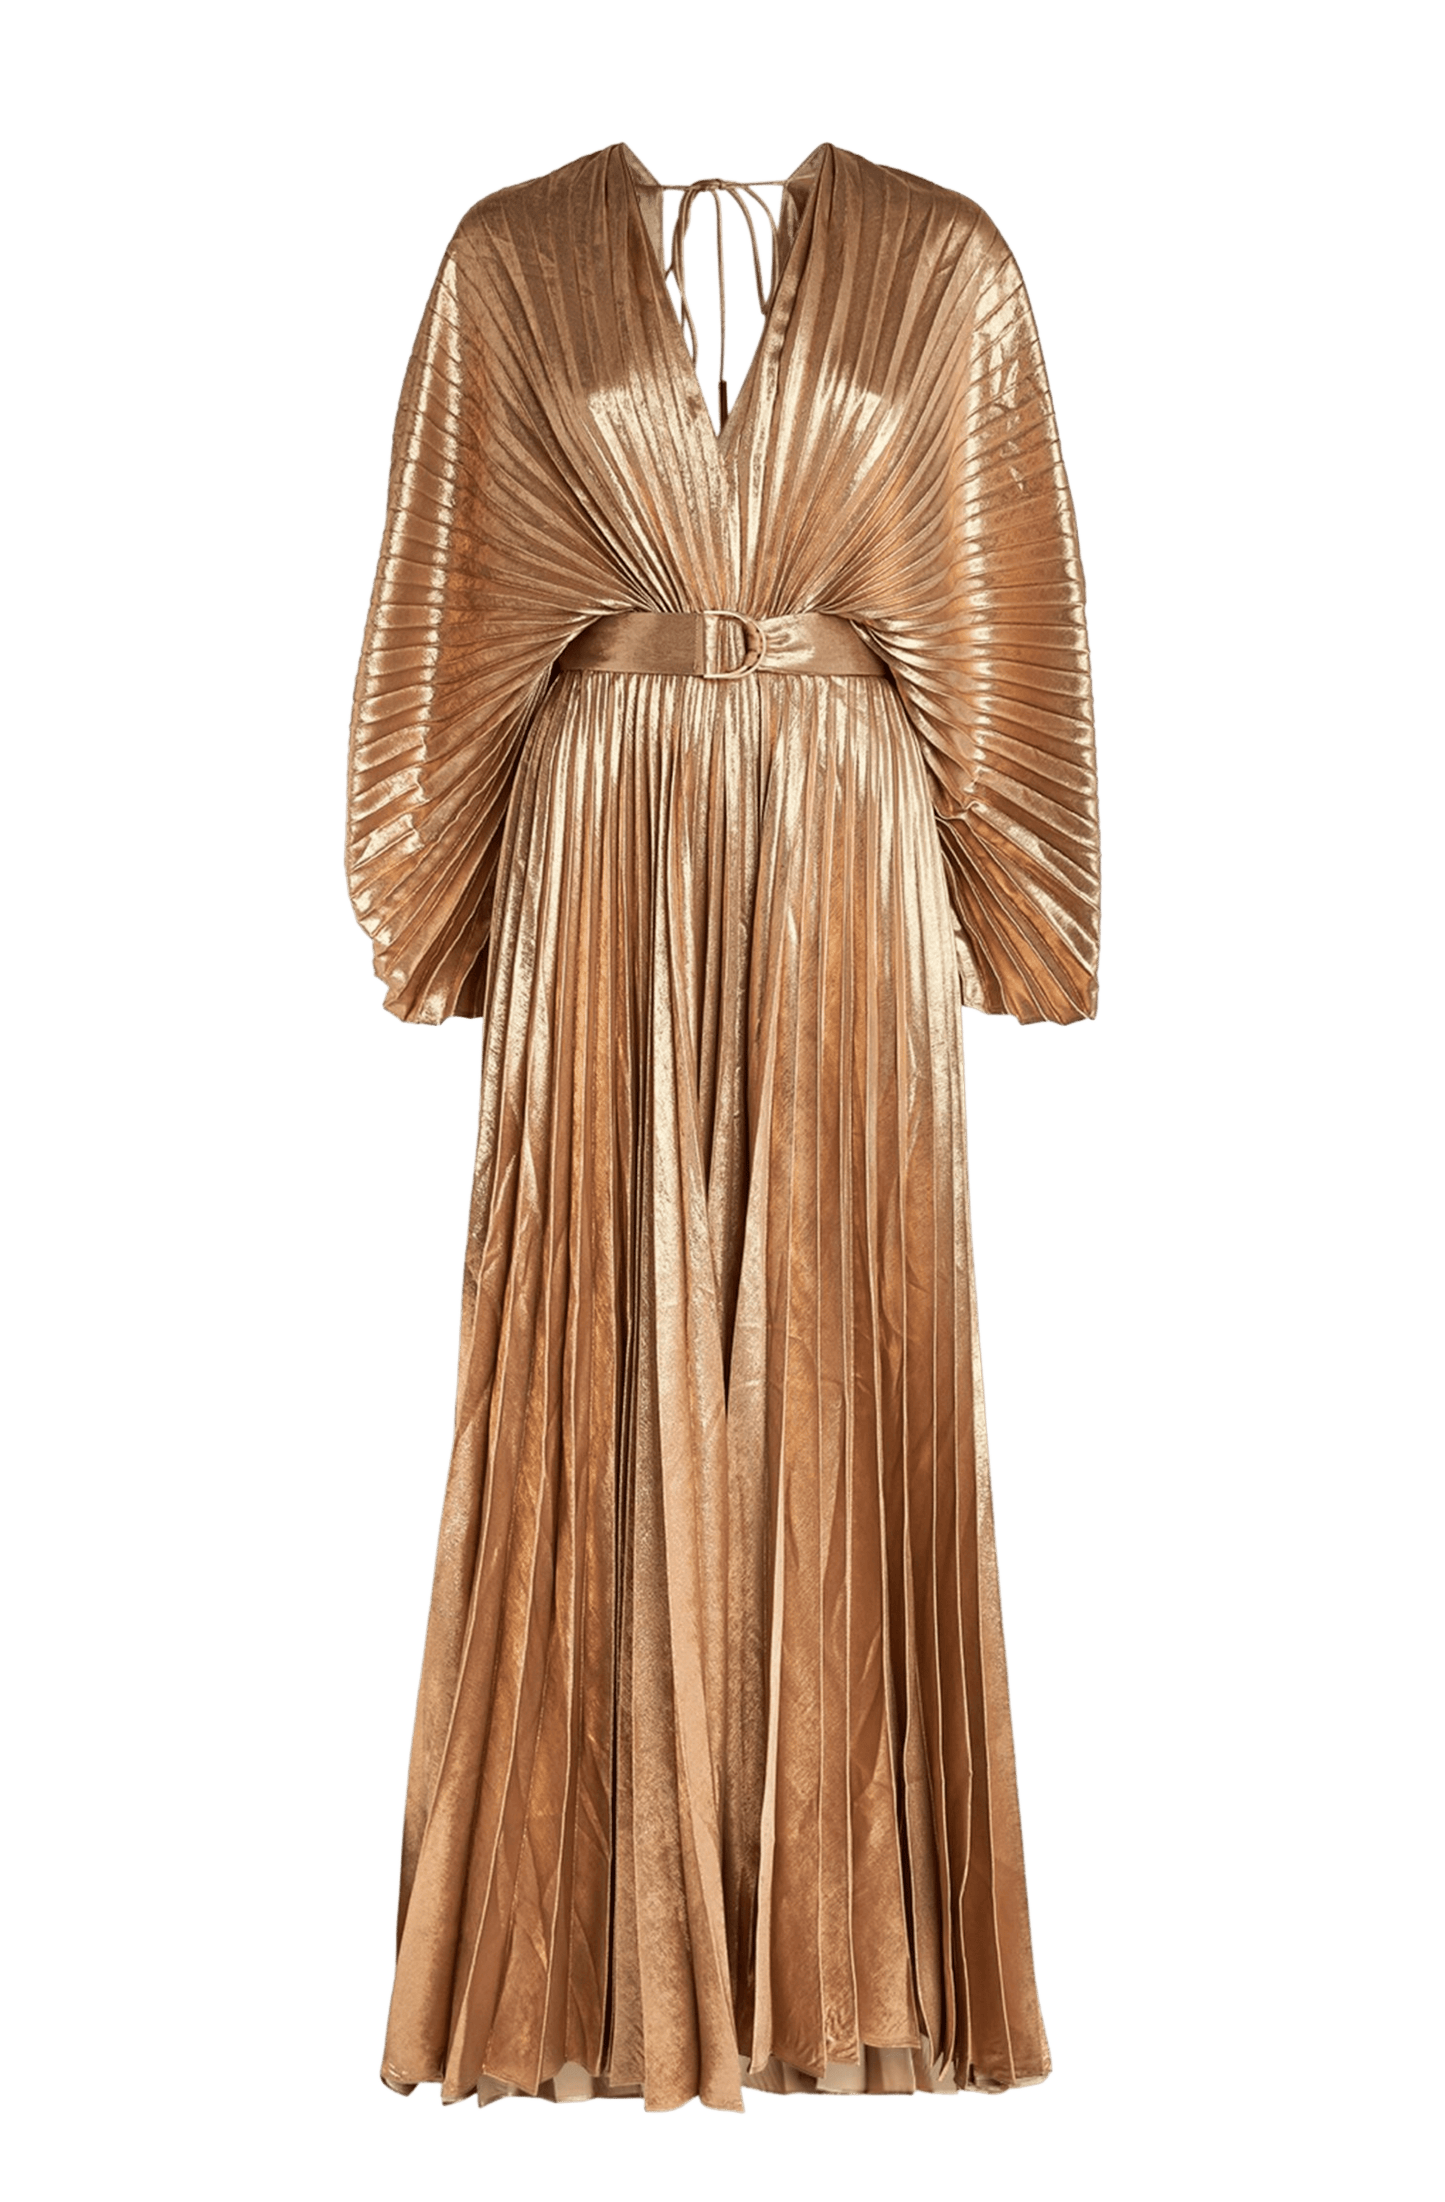 Acler Women's Natural Westover Dress The Westover Dress in Gold by Acler is a maxi dress crafted in a gold pleated fabrication featuring full length sleeves, a plunging neckline, open back, and statement belt.